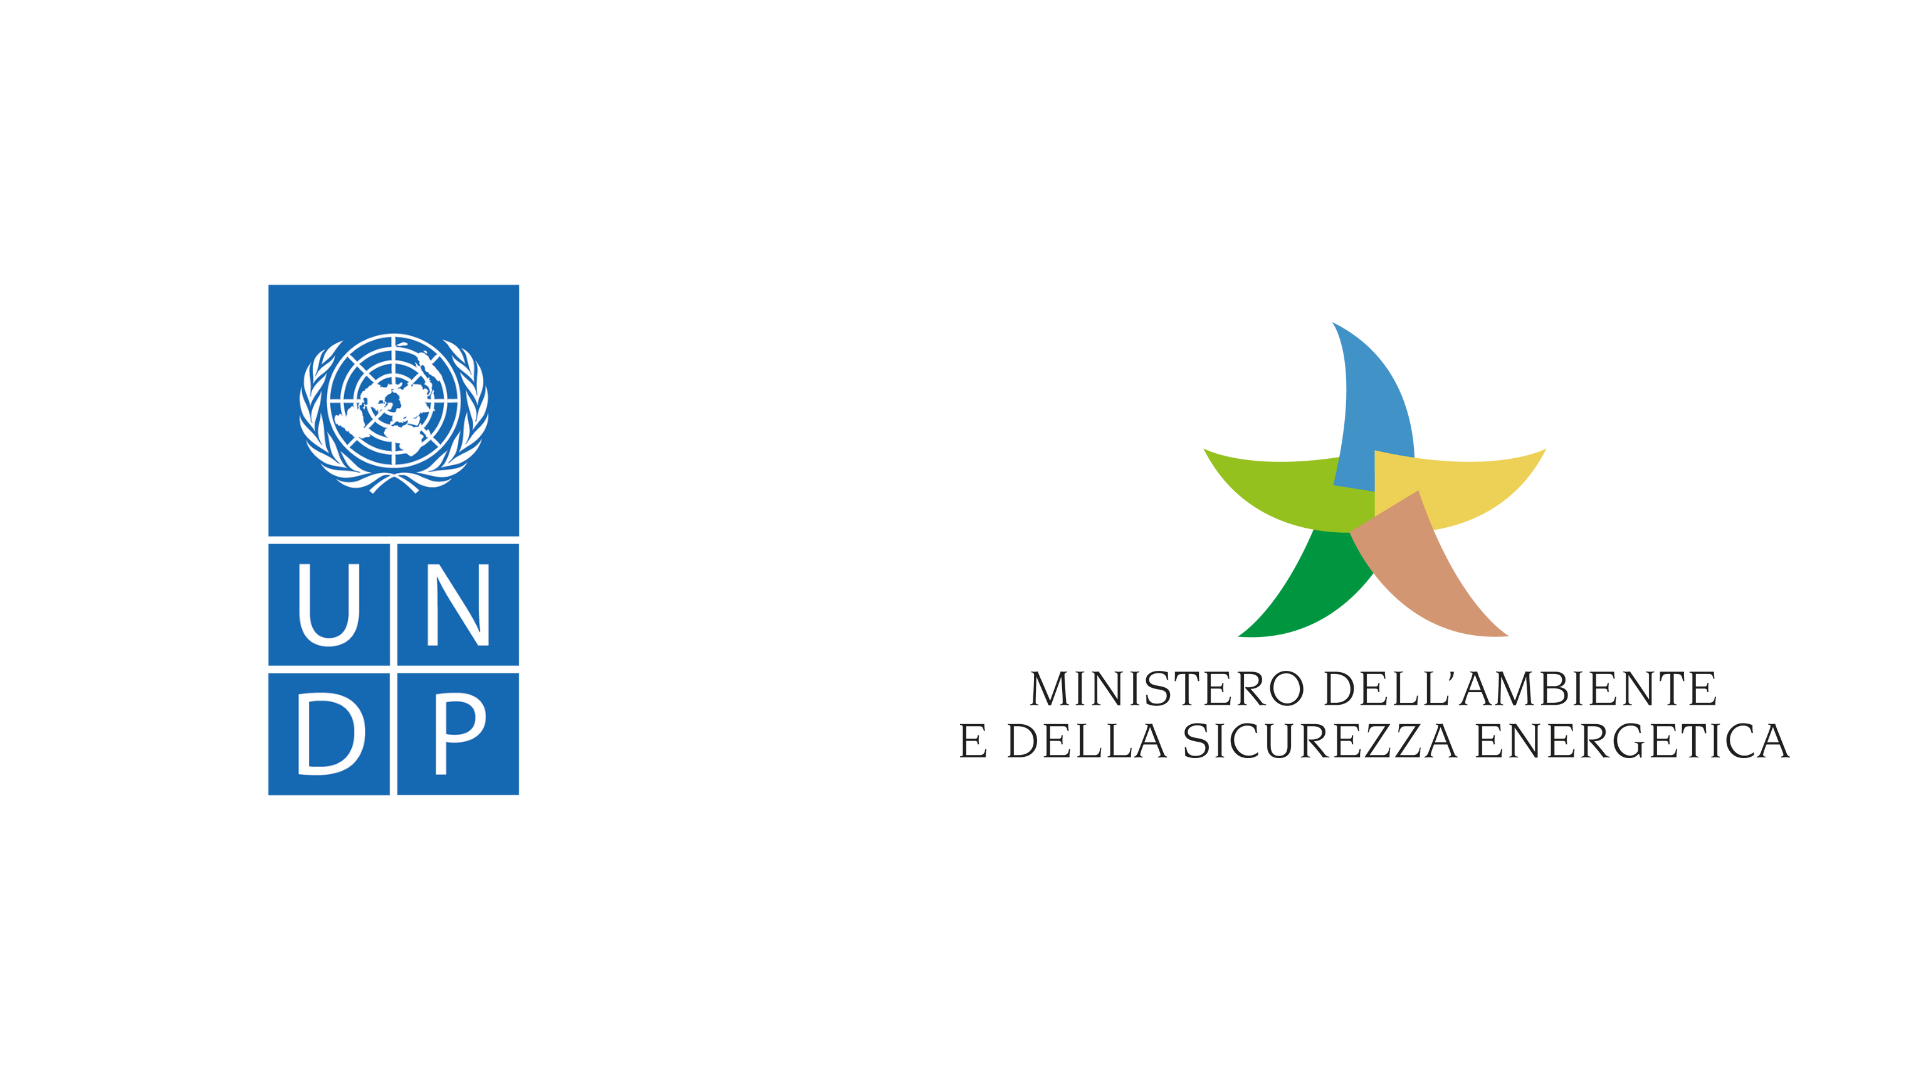 Logos of UNDP and MASE